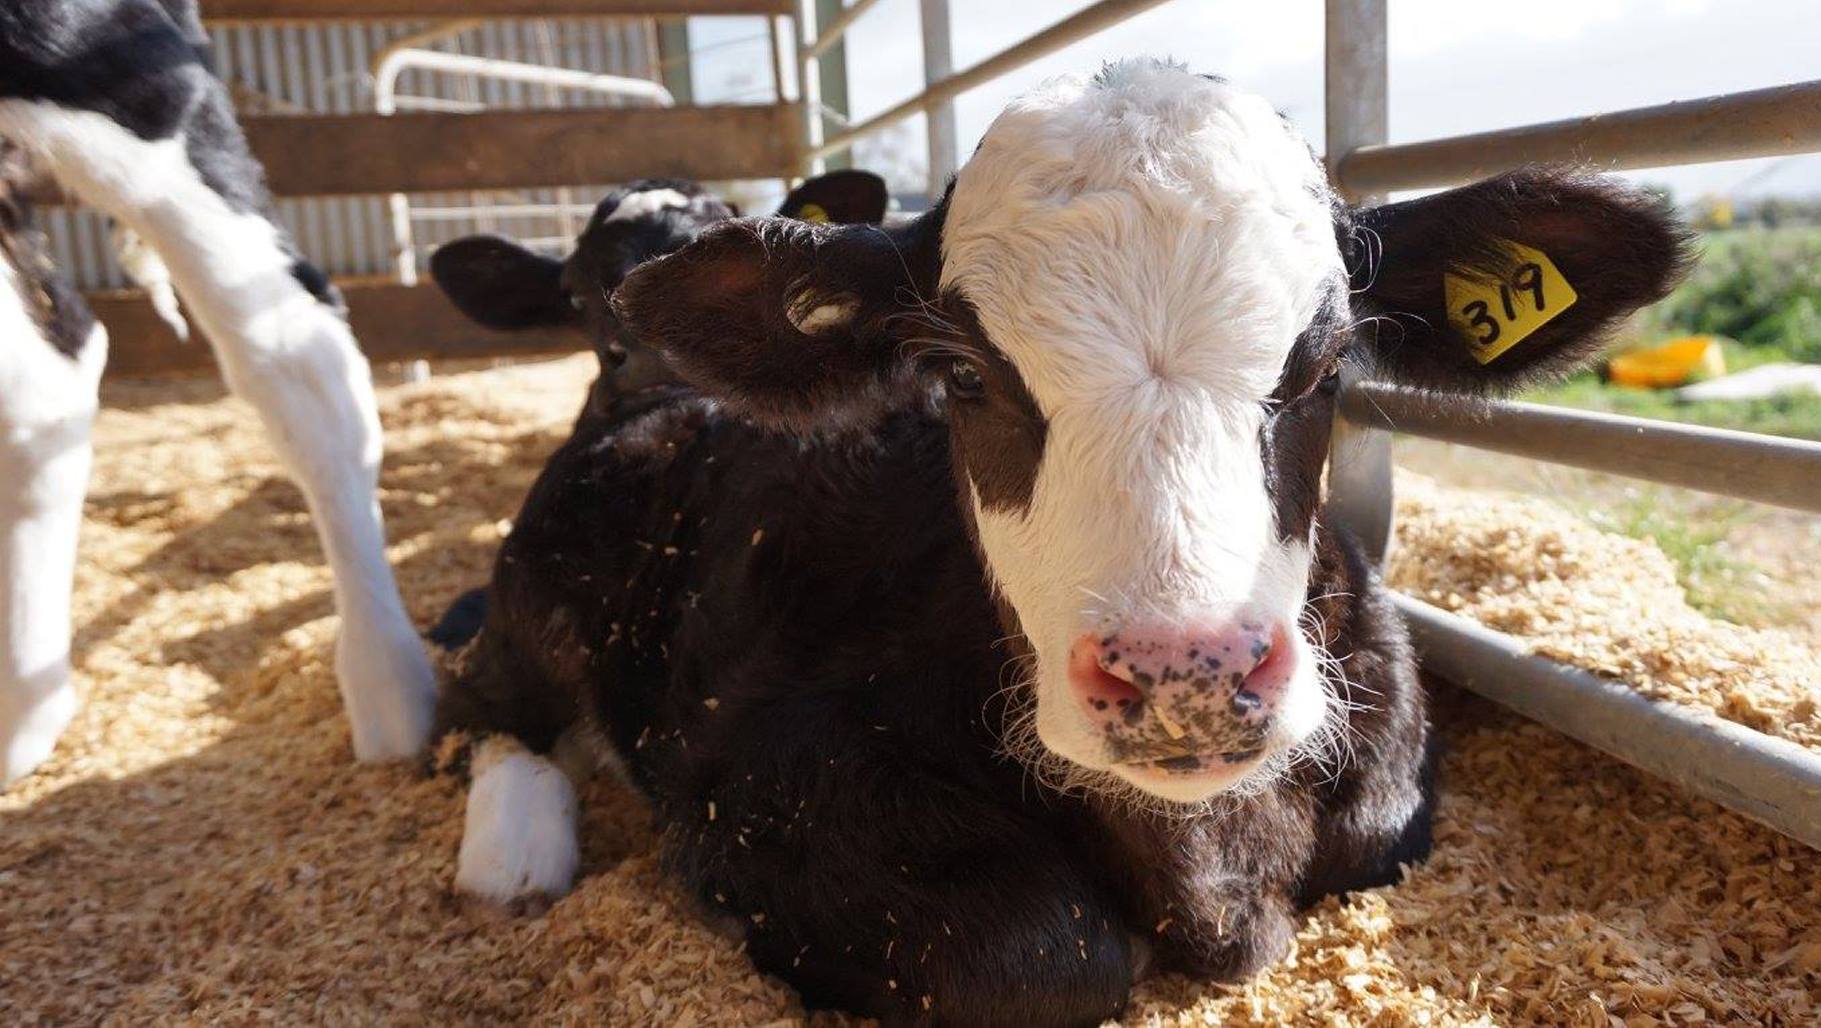 5 steps for better dairy calf welfare | Latest News | RSPCA Approved